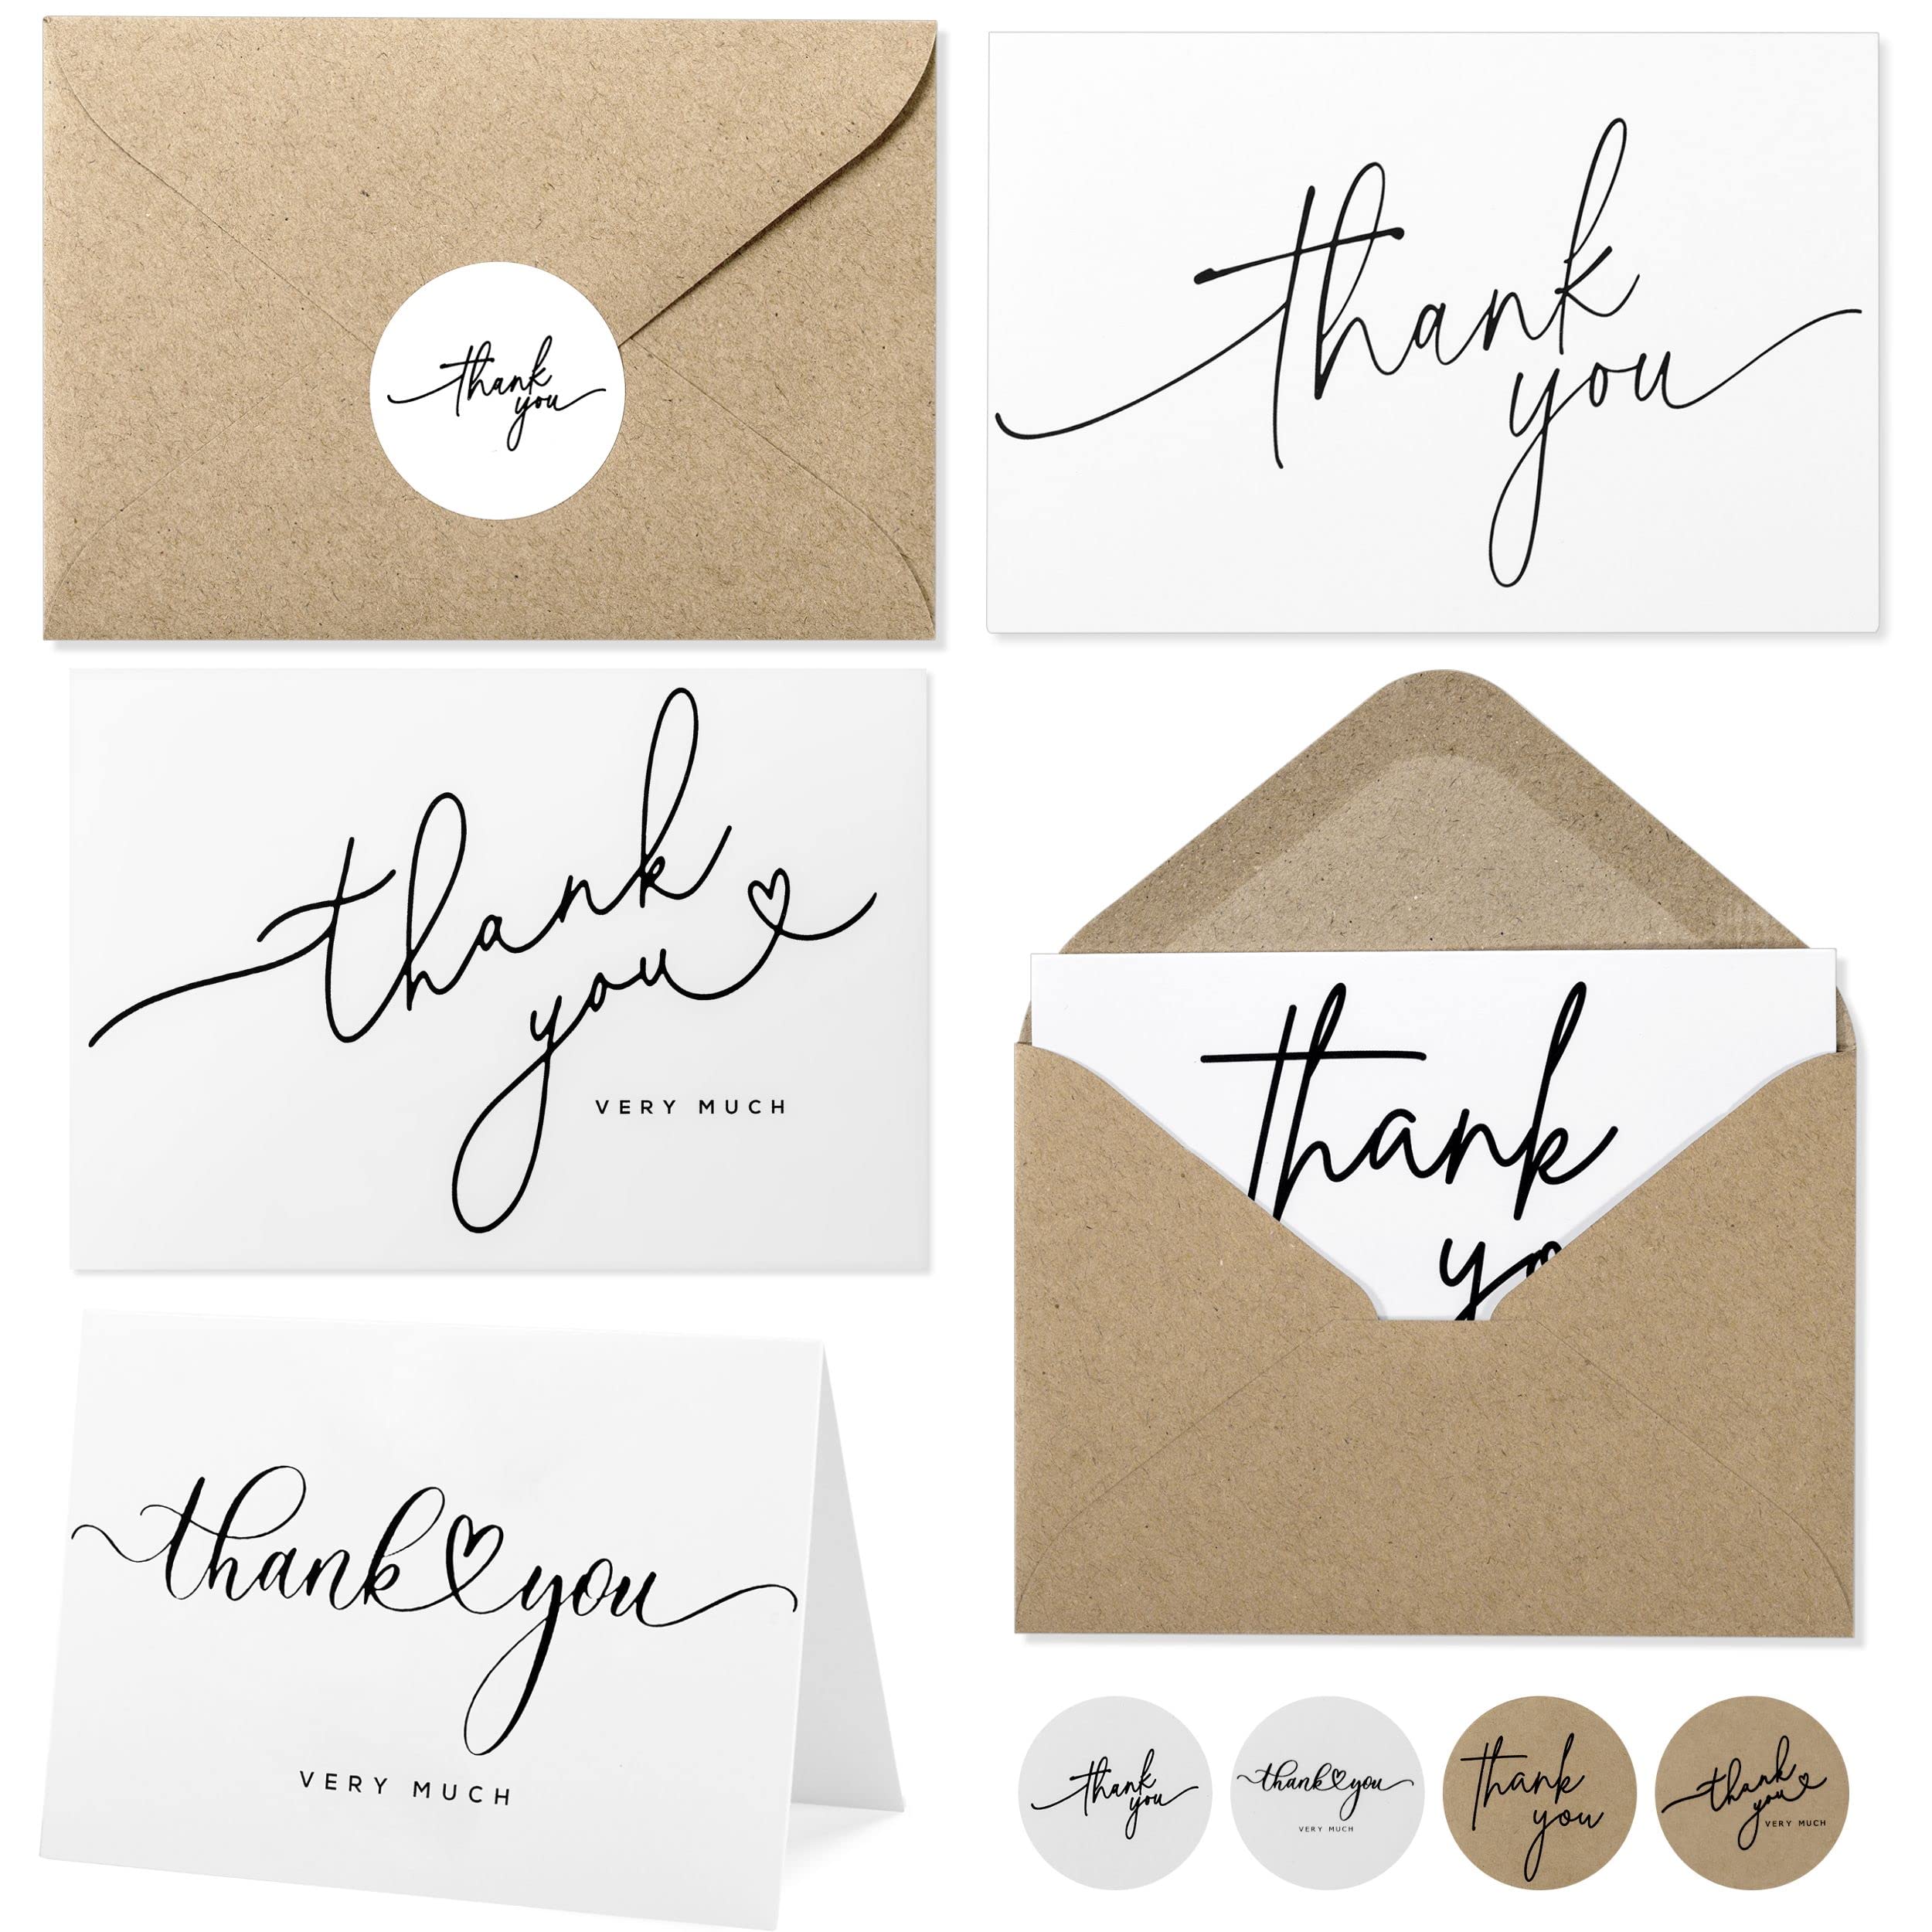 Layneria 100 Bulk Thank You cards with Kraft Envelopes and stickers - 4 Minimalistic Designs Blank Thank You Notes with Envelopes for bus